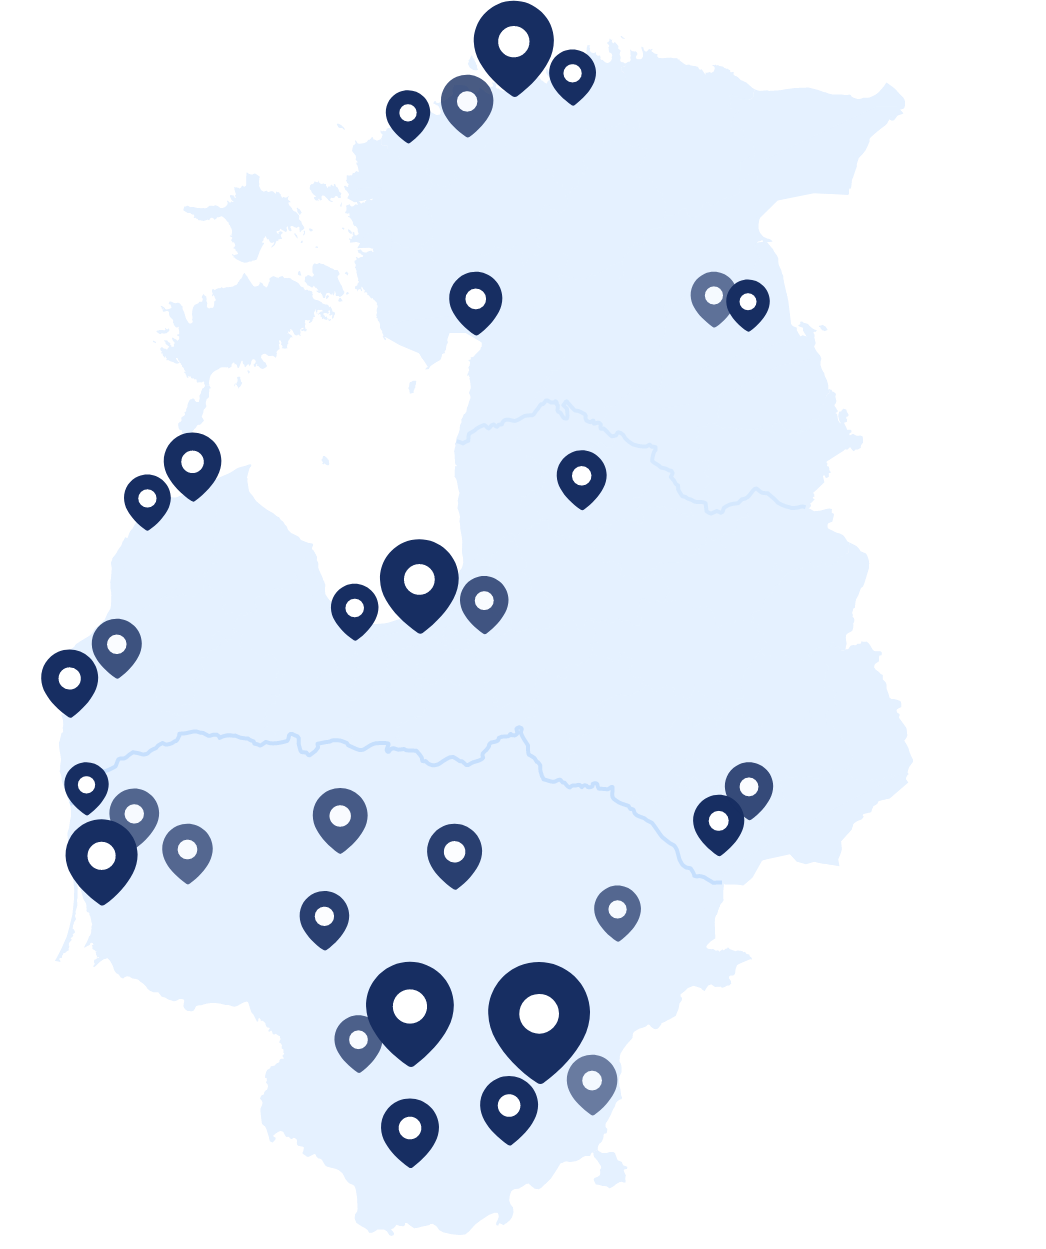 Baltic countries map with EV charging locations pins